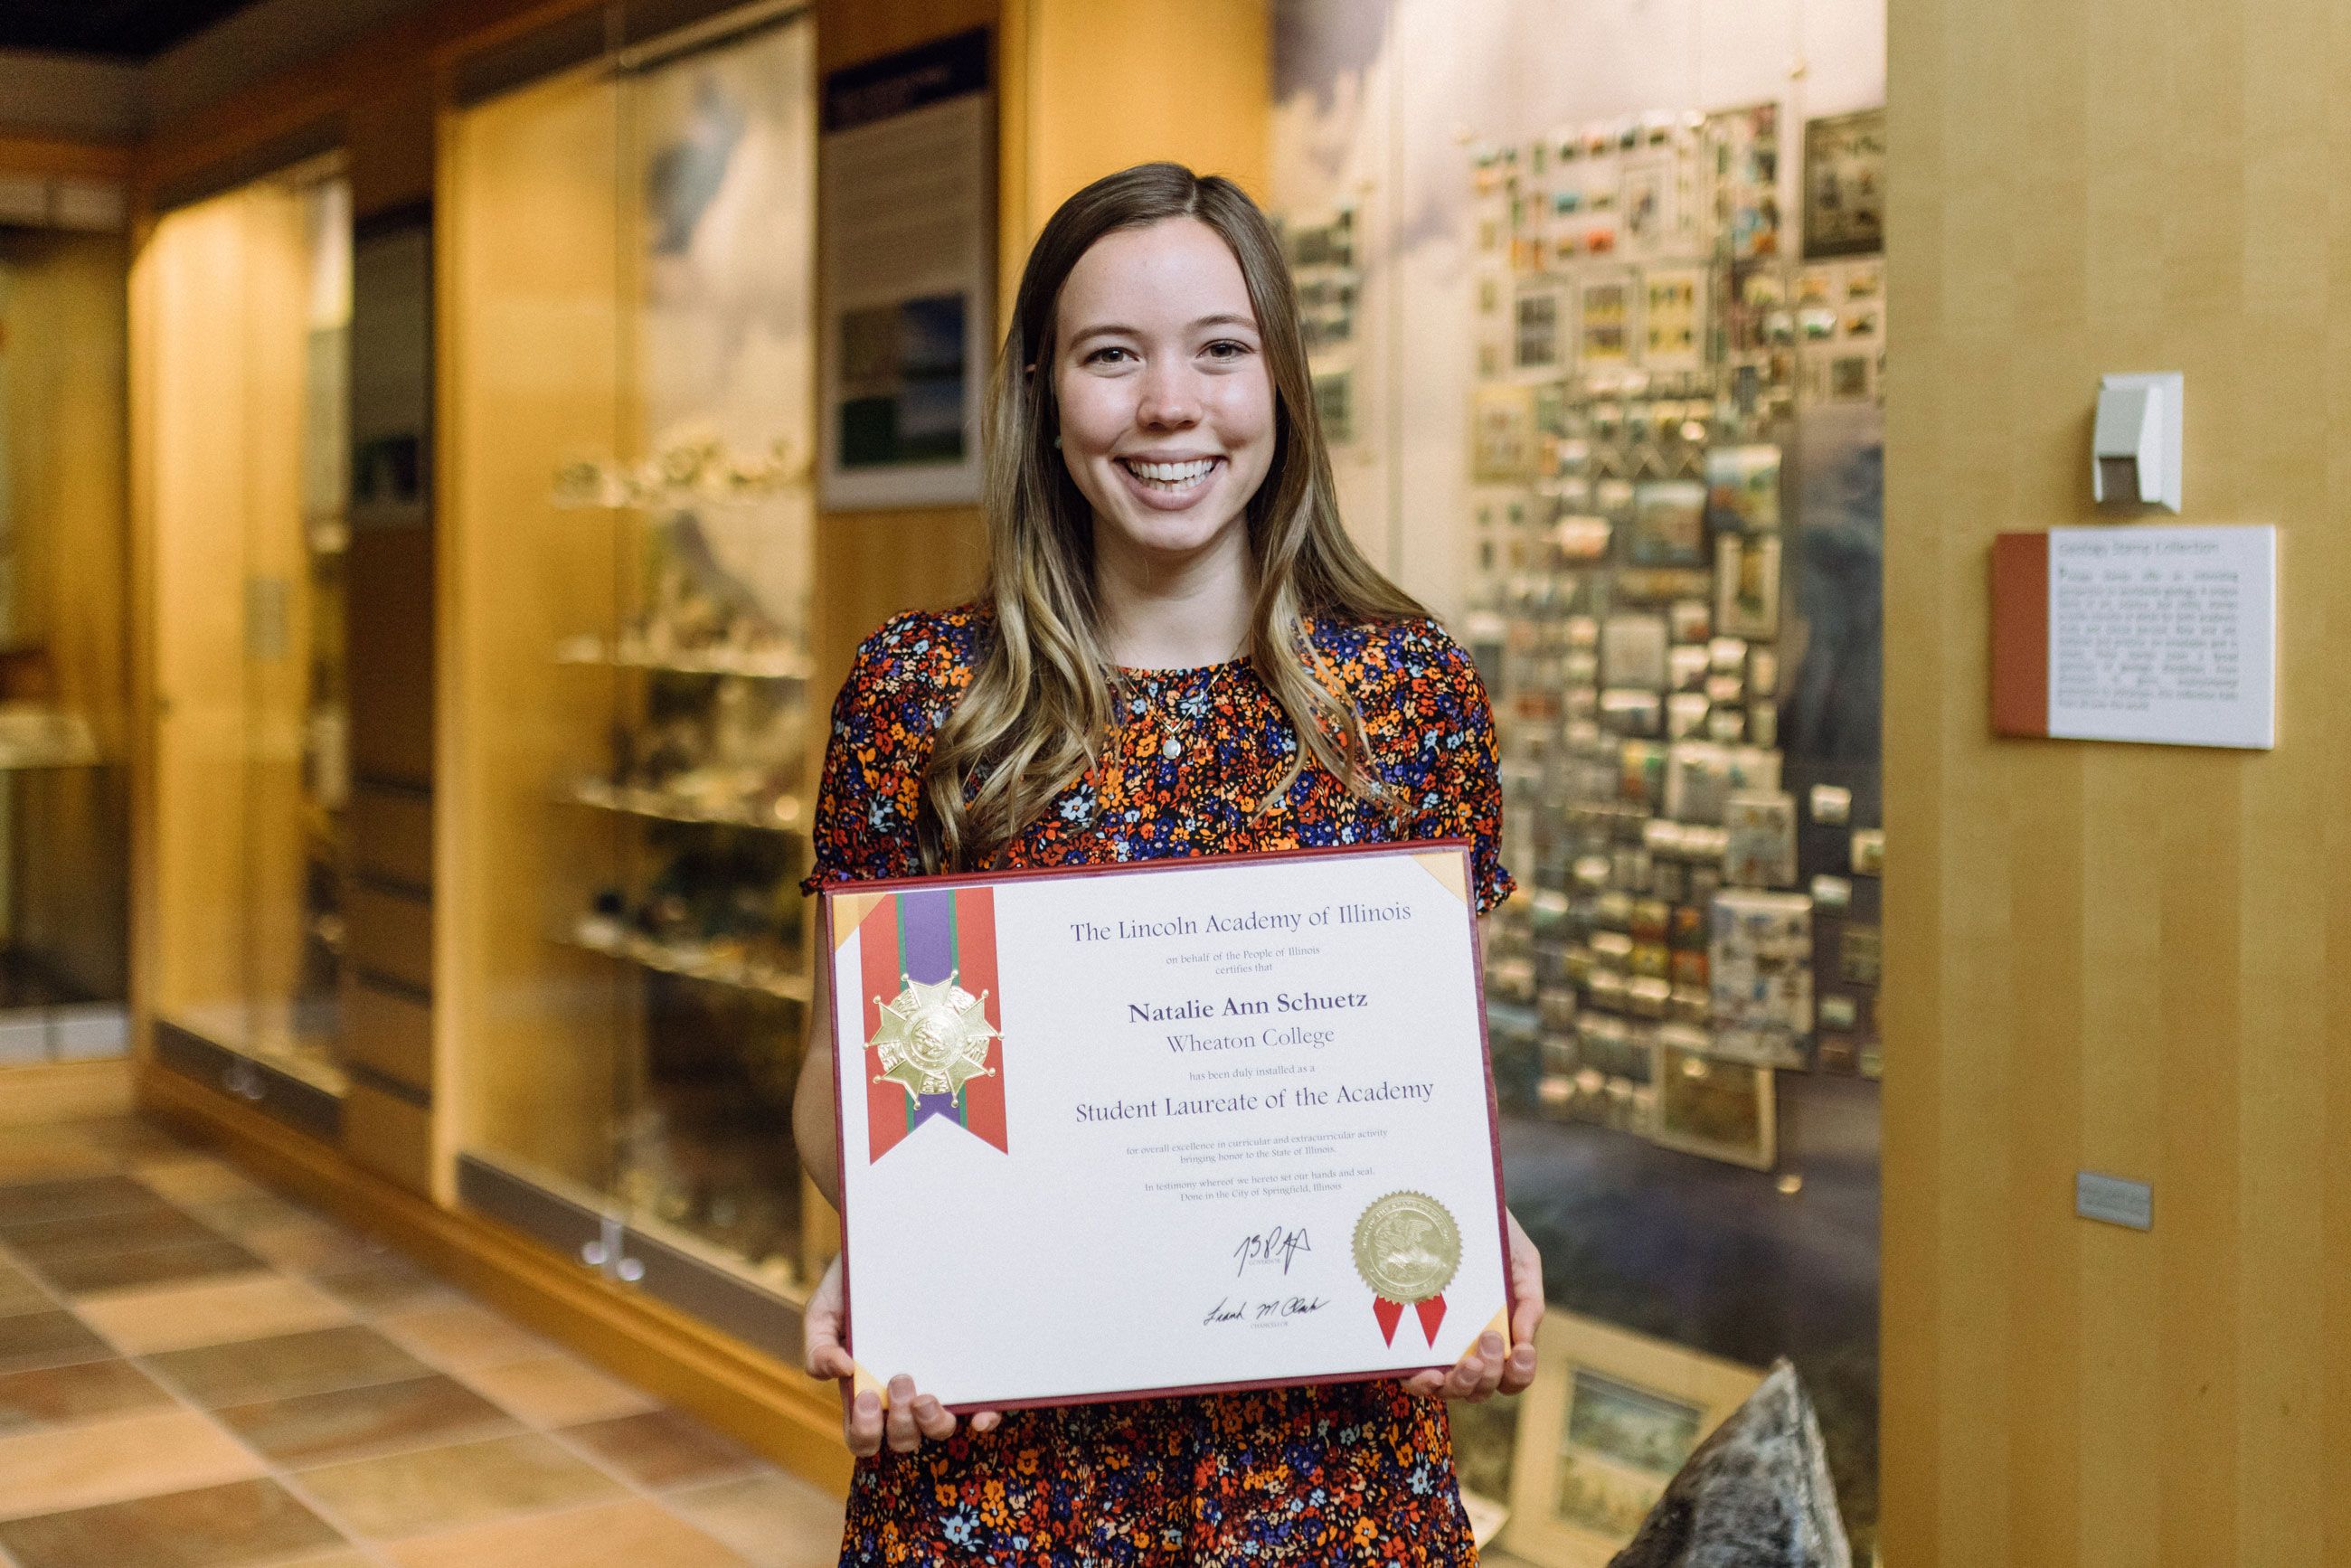 Wheaton College senior Natalie Schuetz with her Student Laureate award from the Lincoln Academy of Illinois.